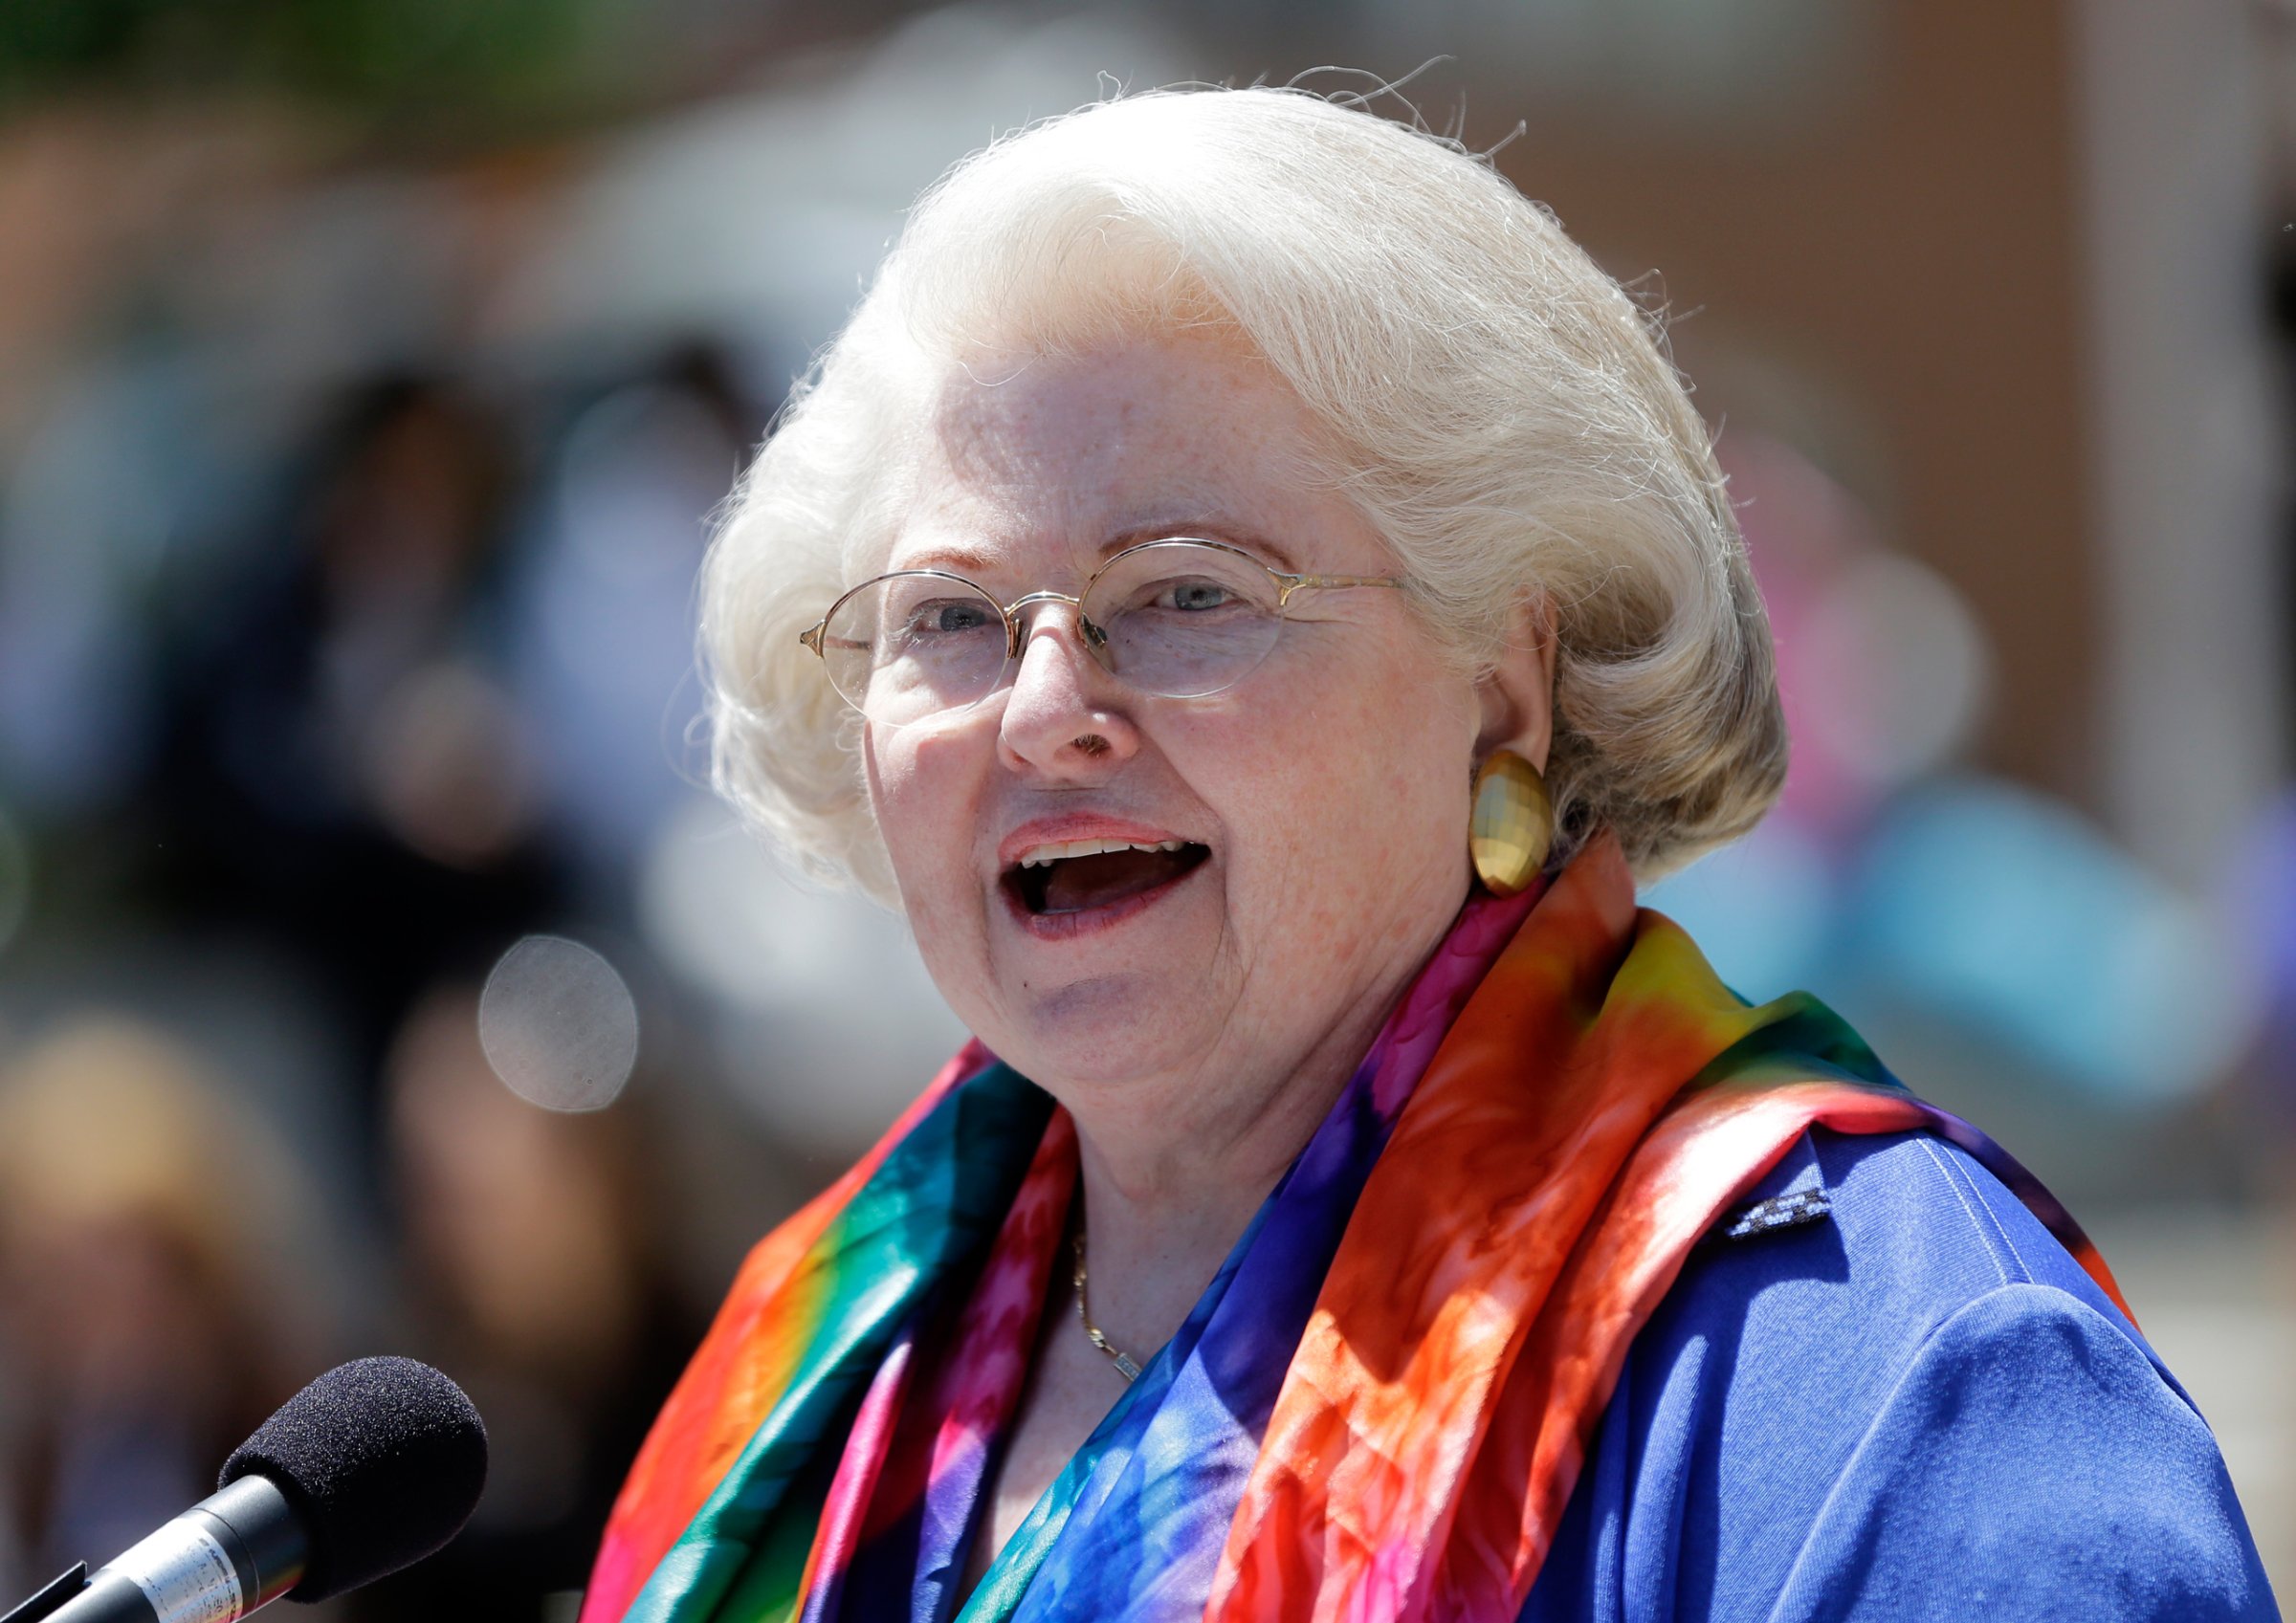 Attorney Sarah Weddington, who argued Roe vs. Wade, during a women's rights rally on Tuesday, June 4, 2013, in Albany, N.Y. (AP Photo/Mike Groll)